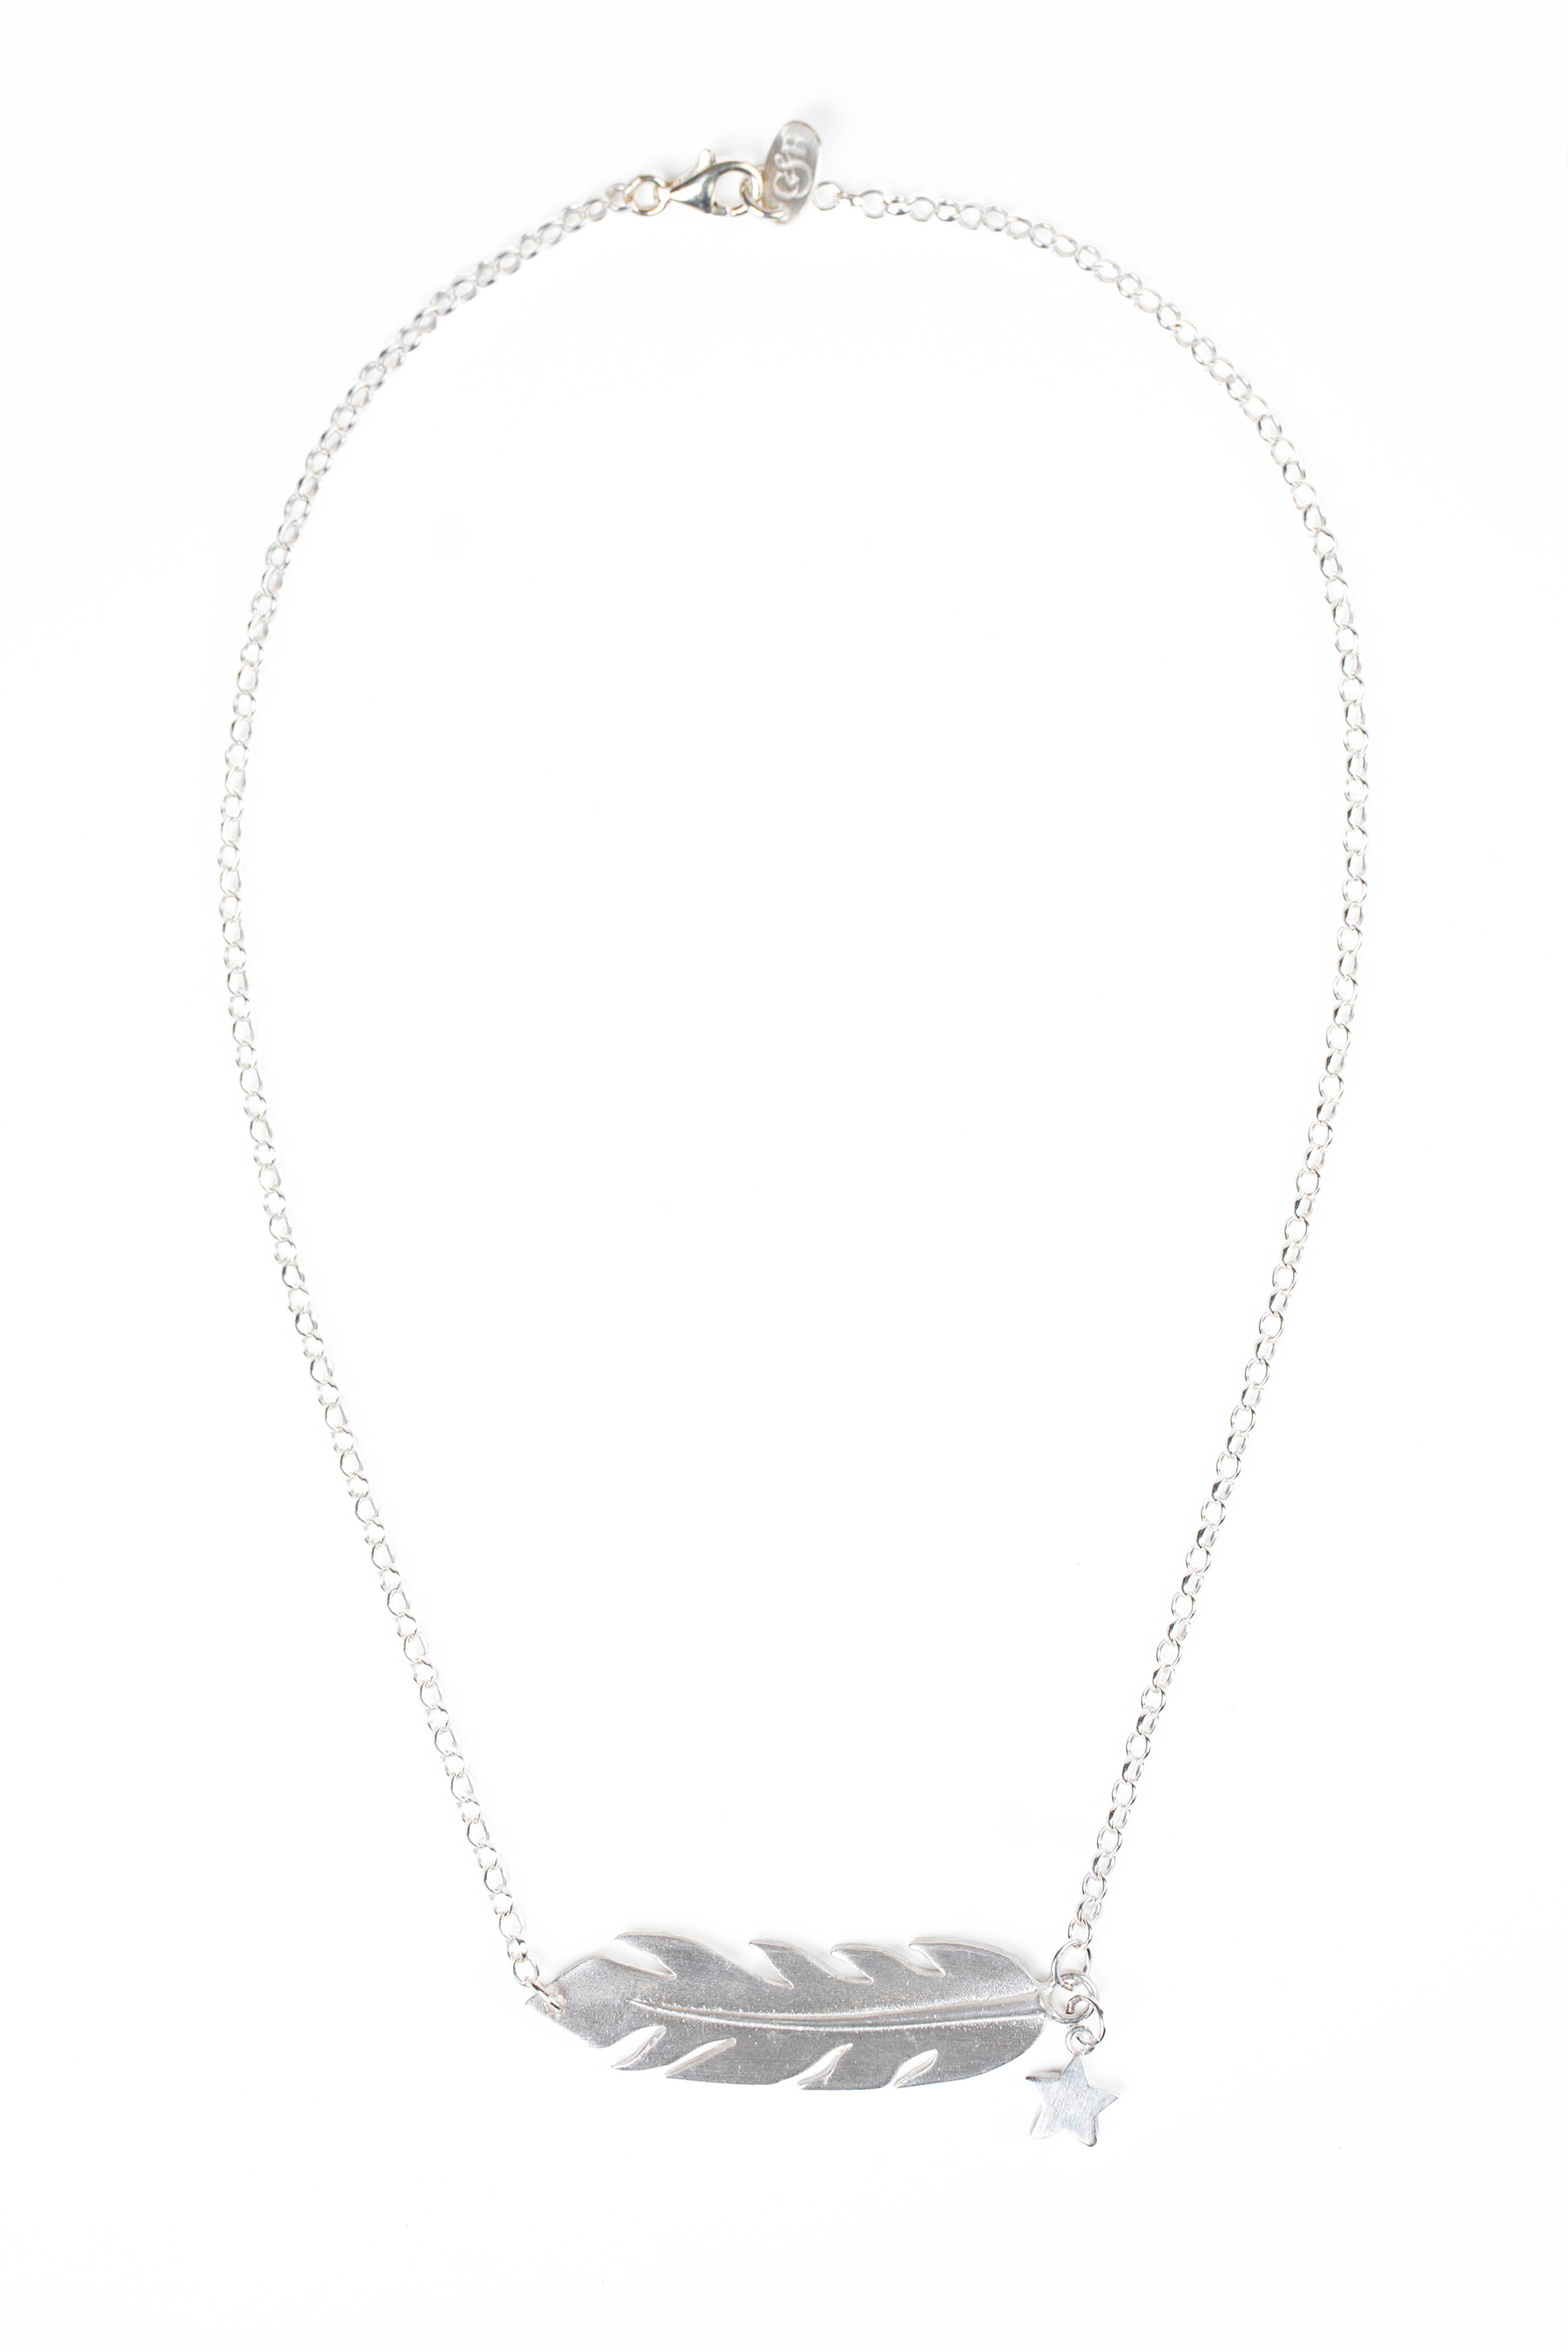 cb298_feathernecklace_silver_whole_resized.jpg